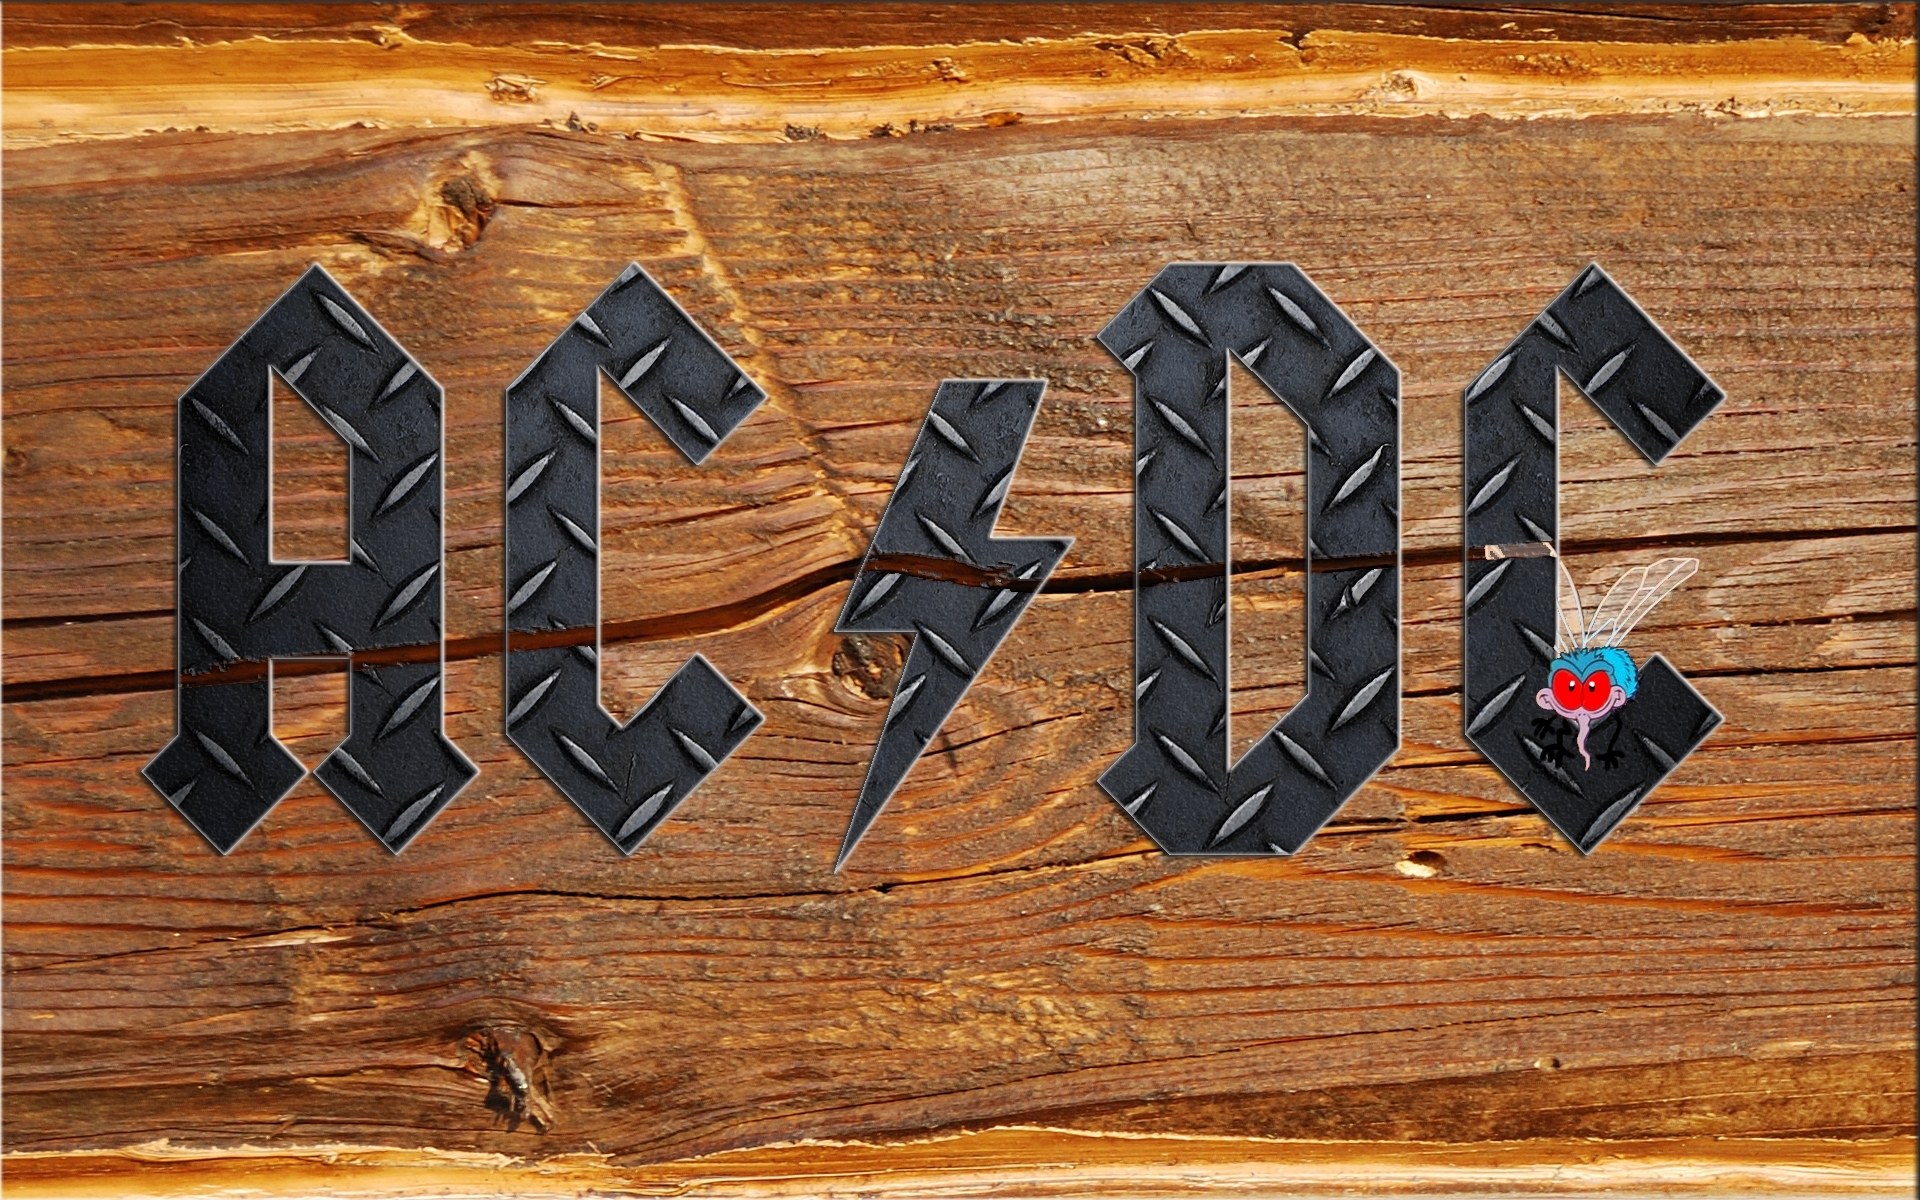 Acdc Logos Wallpapers